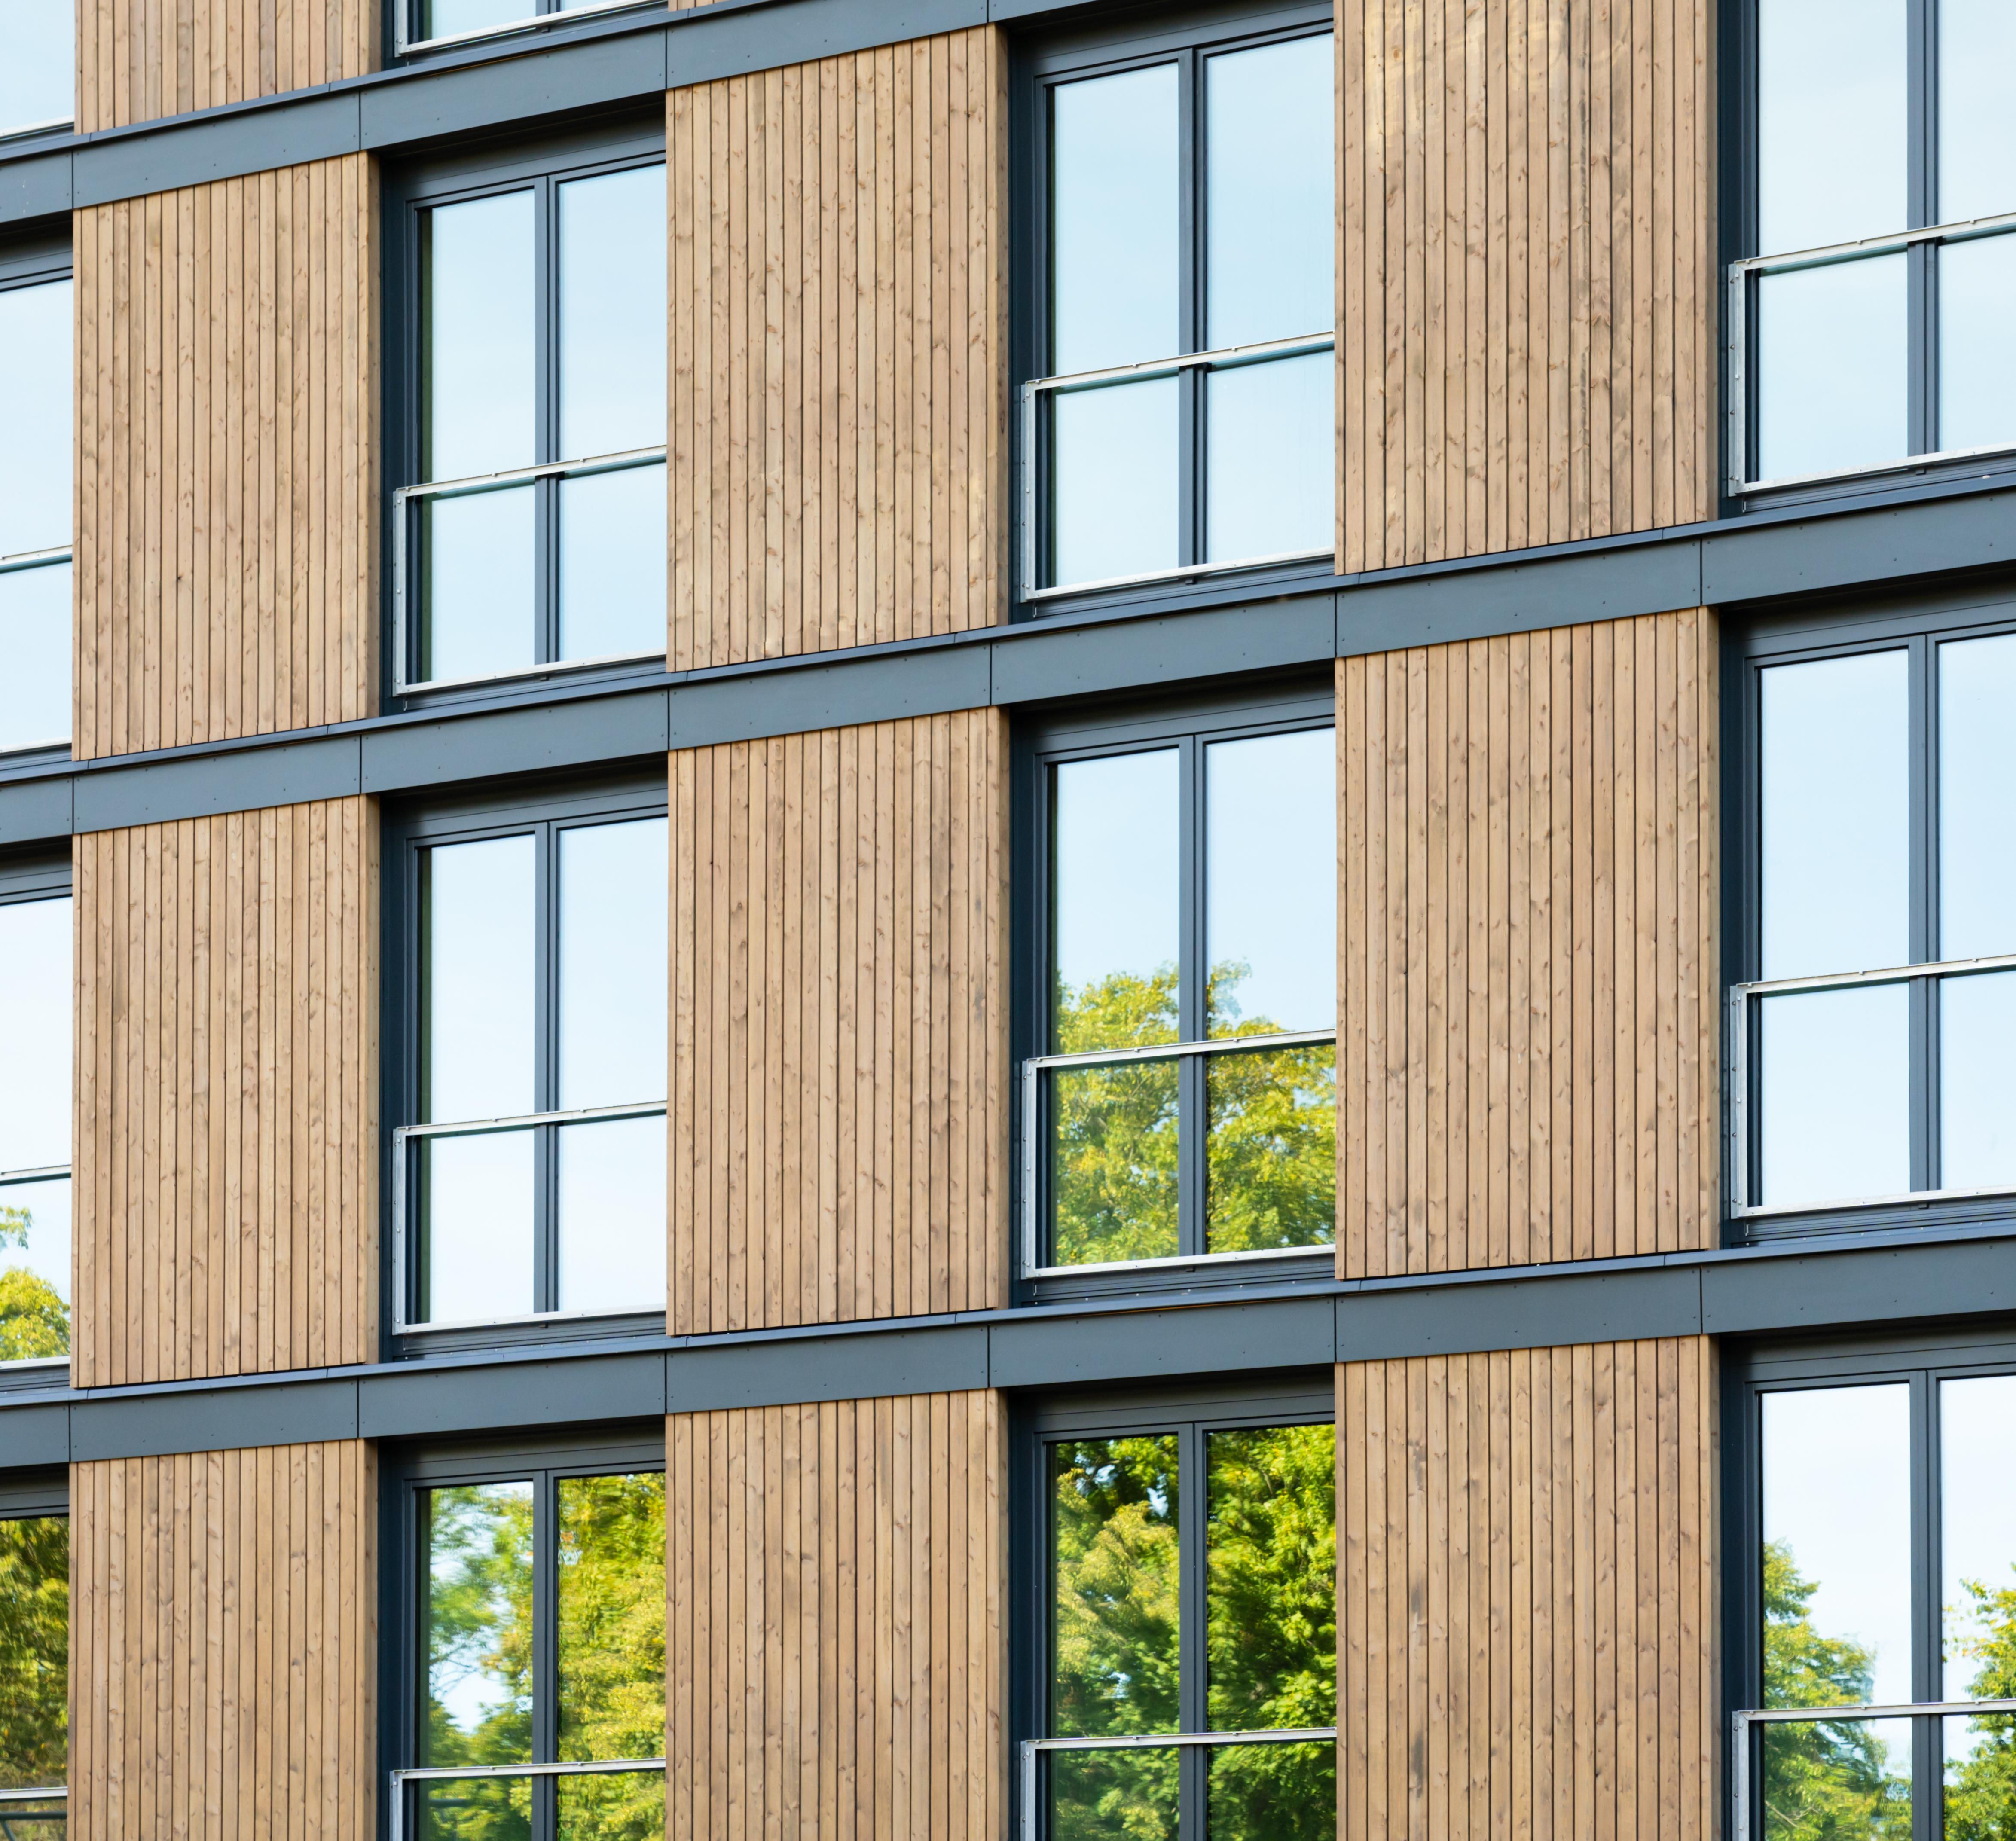 Apartment building with a wood facade